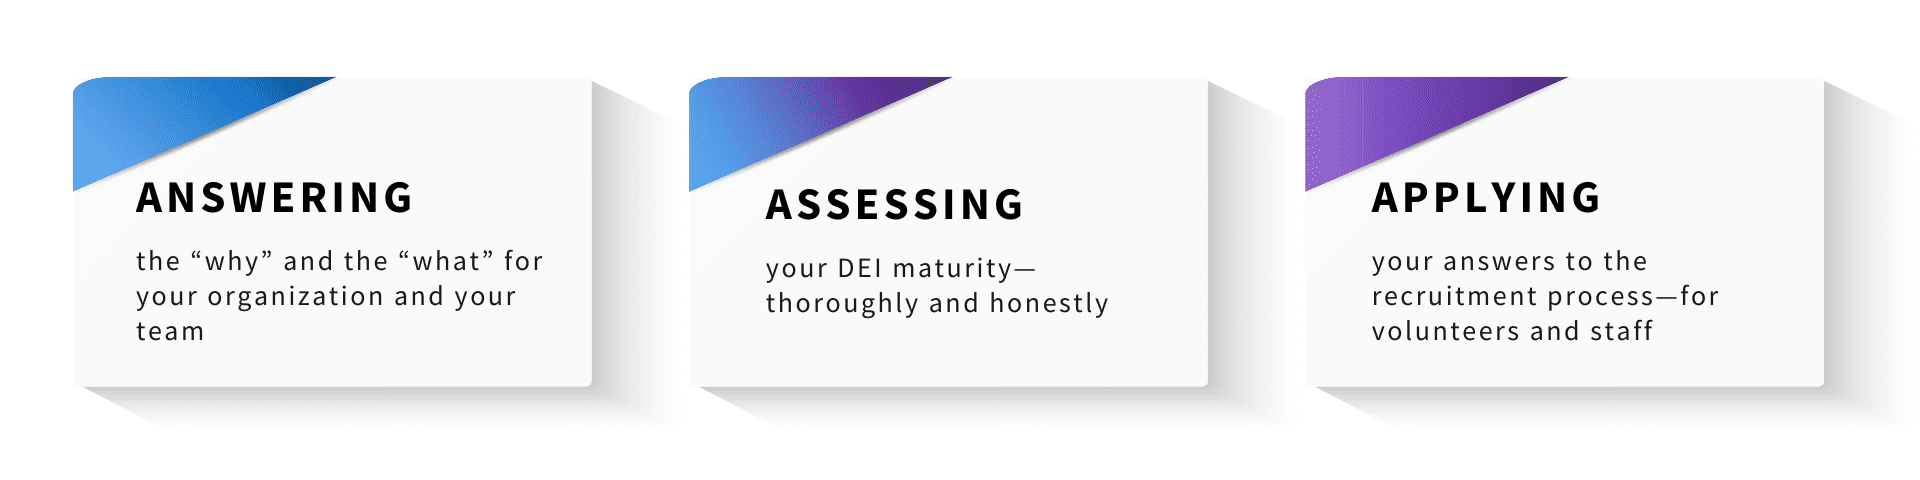 Answering the “why” and the “what” for your organization and your team Assessing your DEI maturity—thoroughly and honestly Applying your answers to the recruitment process—for volunteers and staff